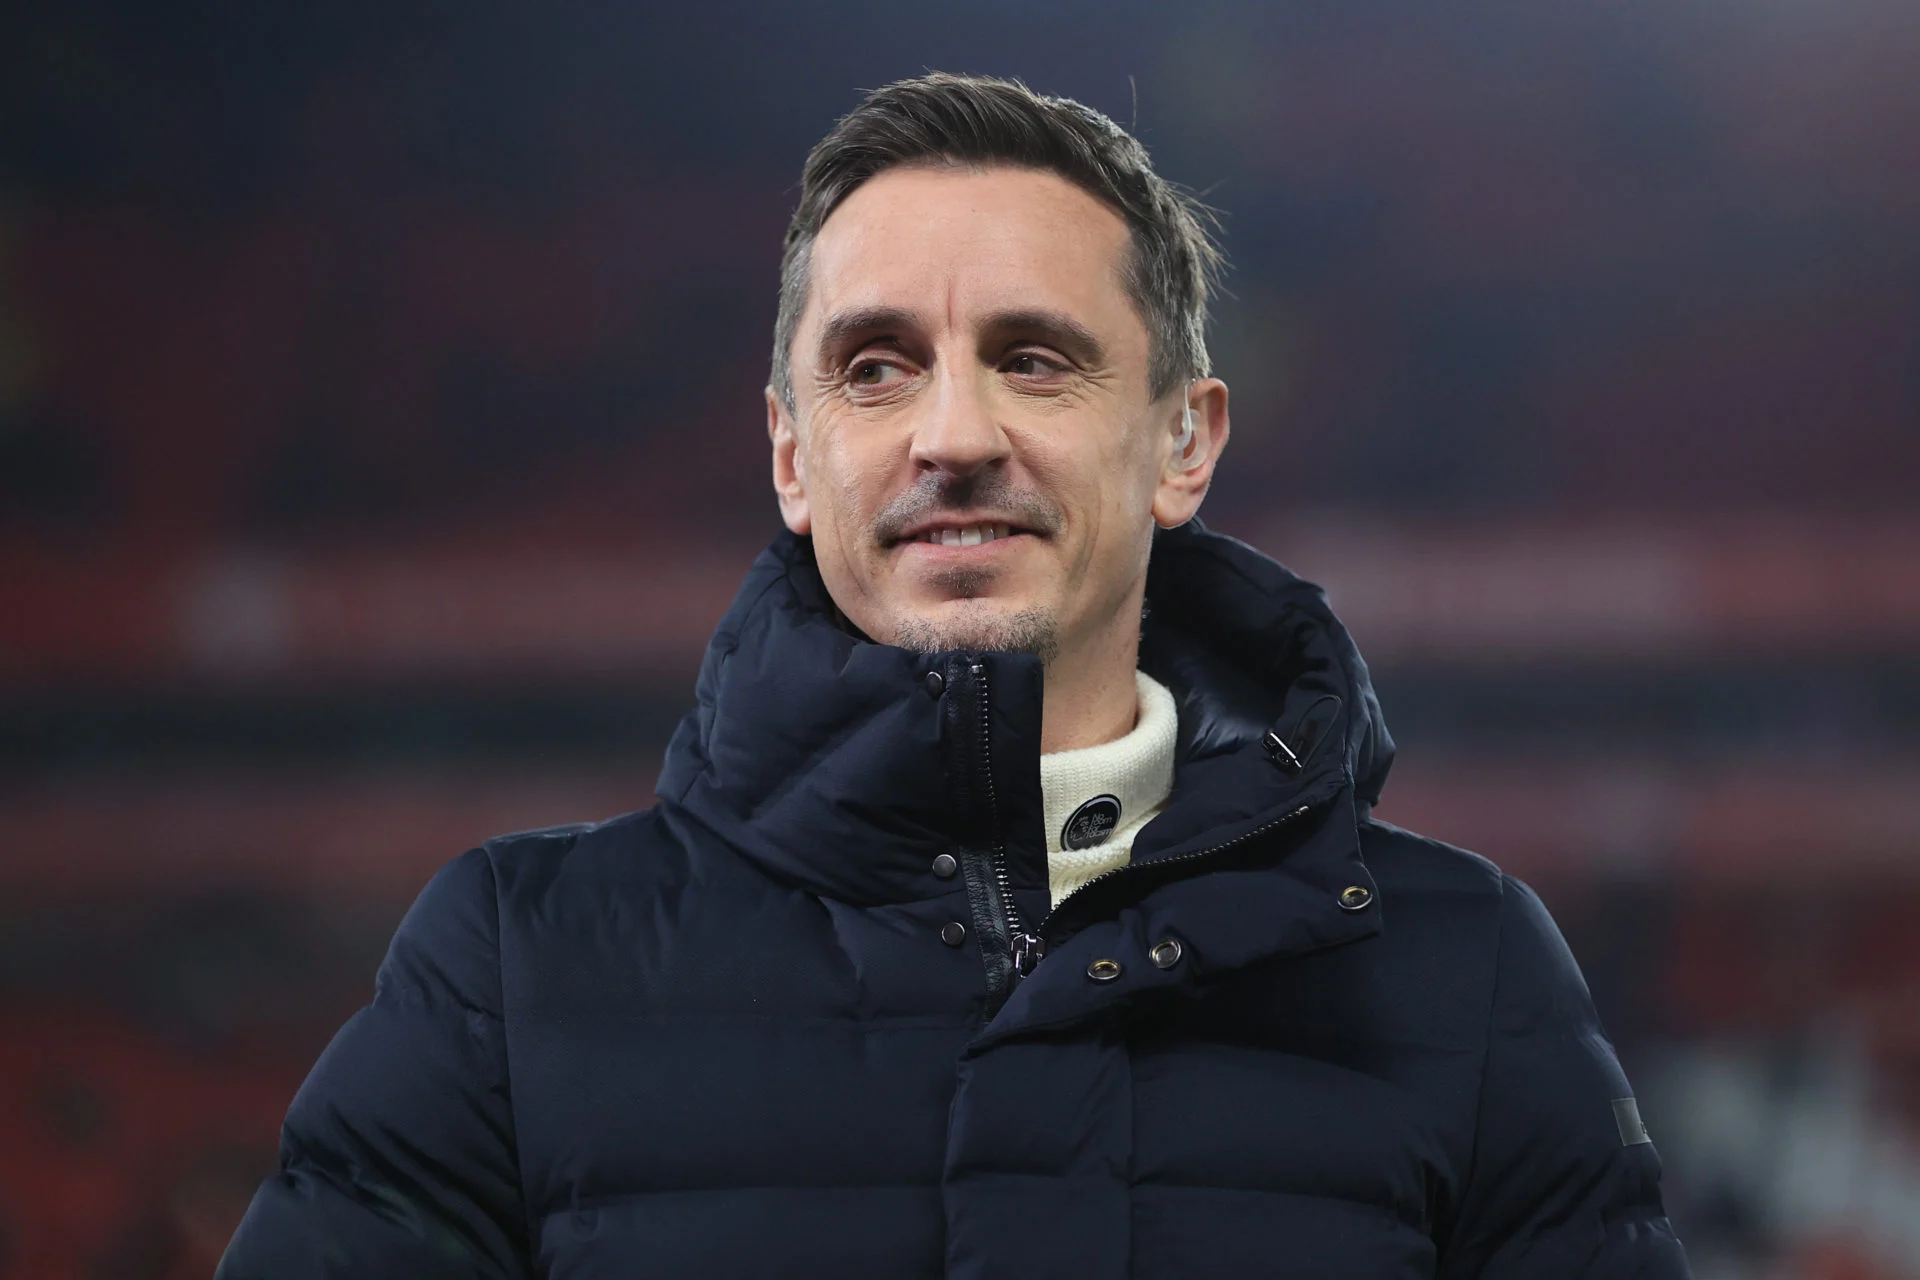 Gary Neville makes prediction on Alexander Isak after Newcastle United's win over Manchester United